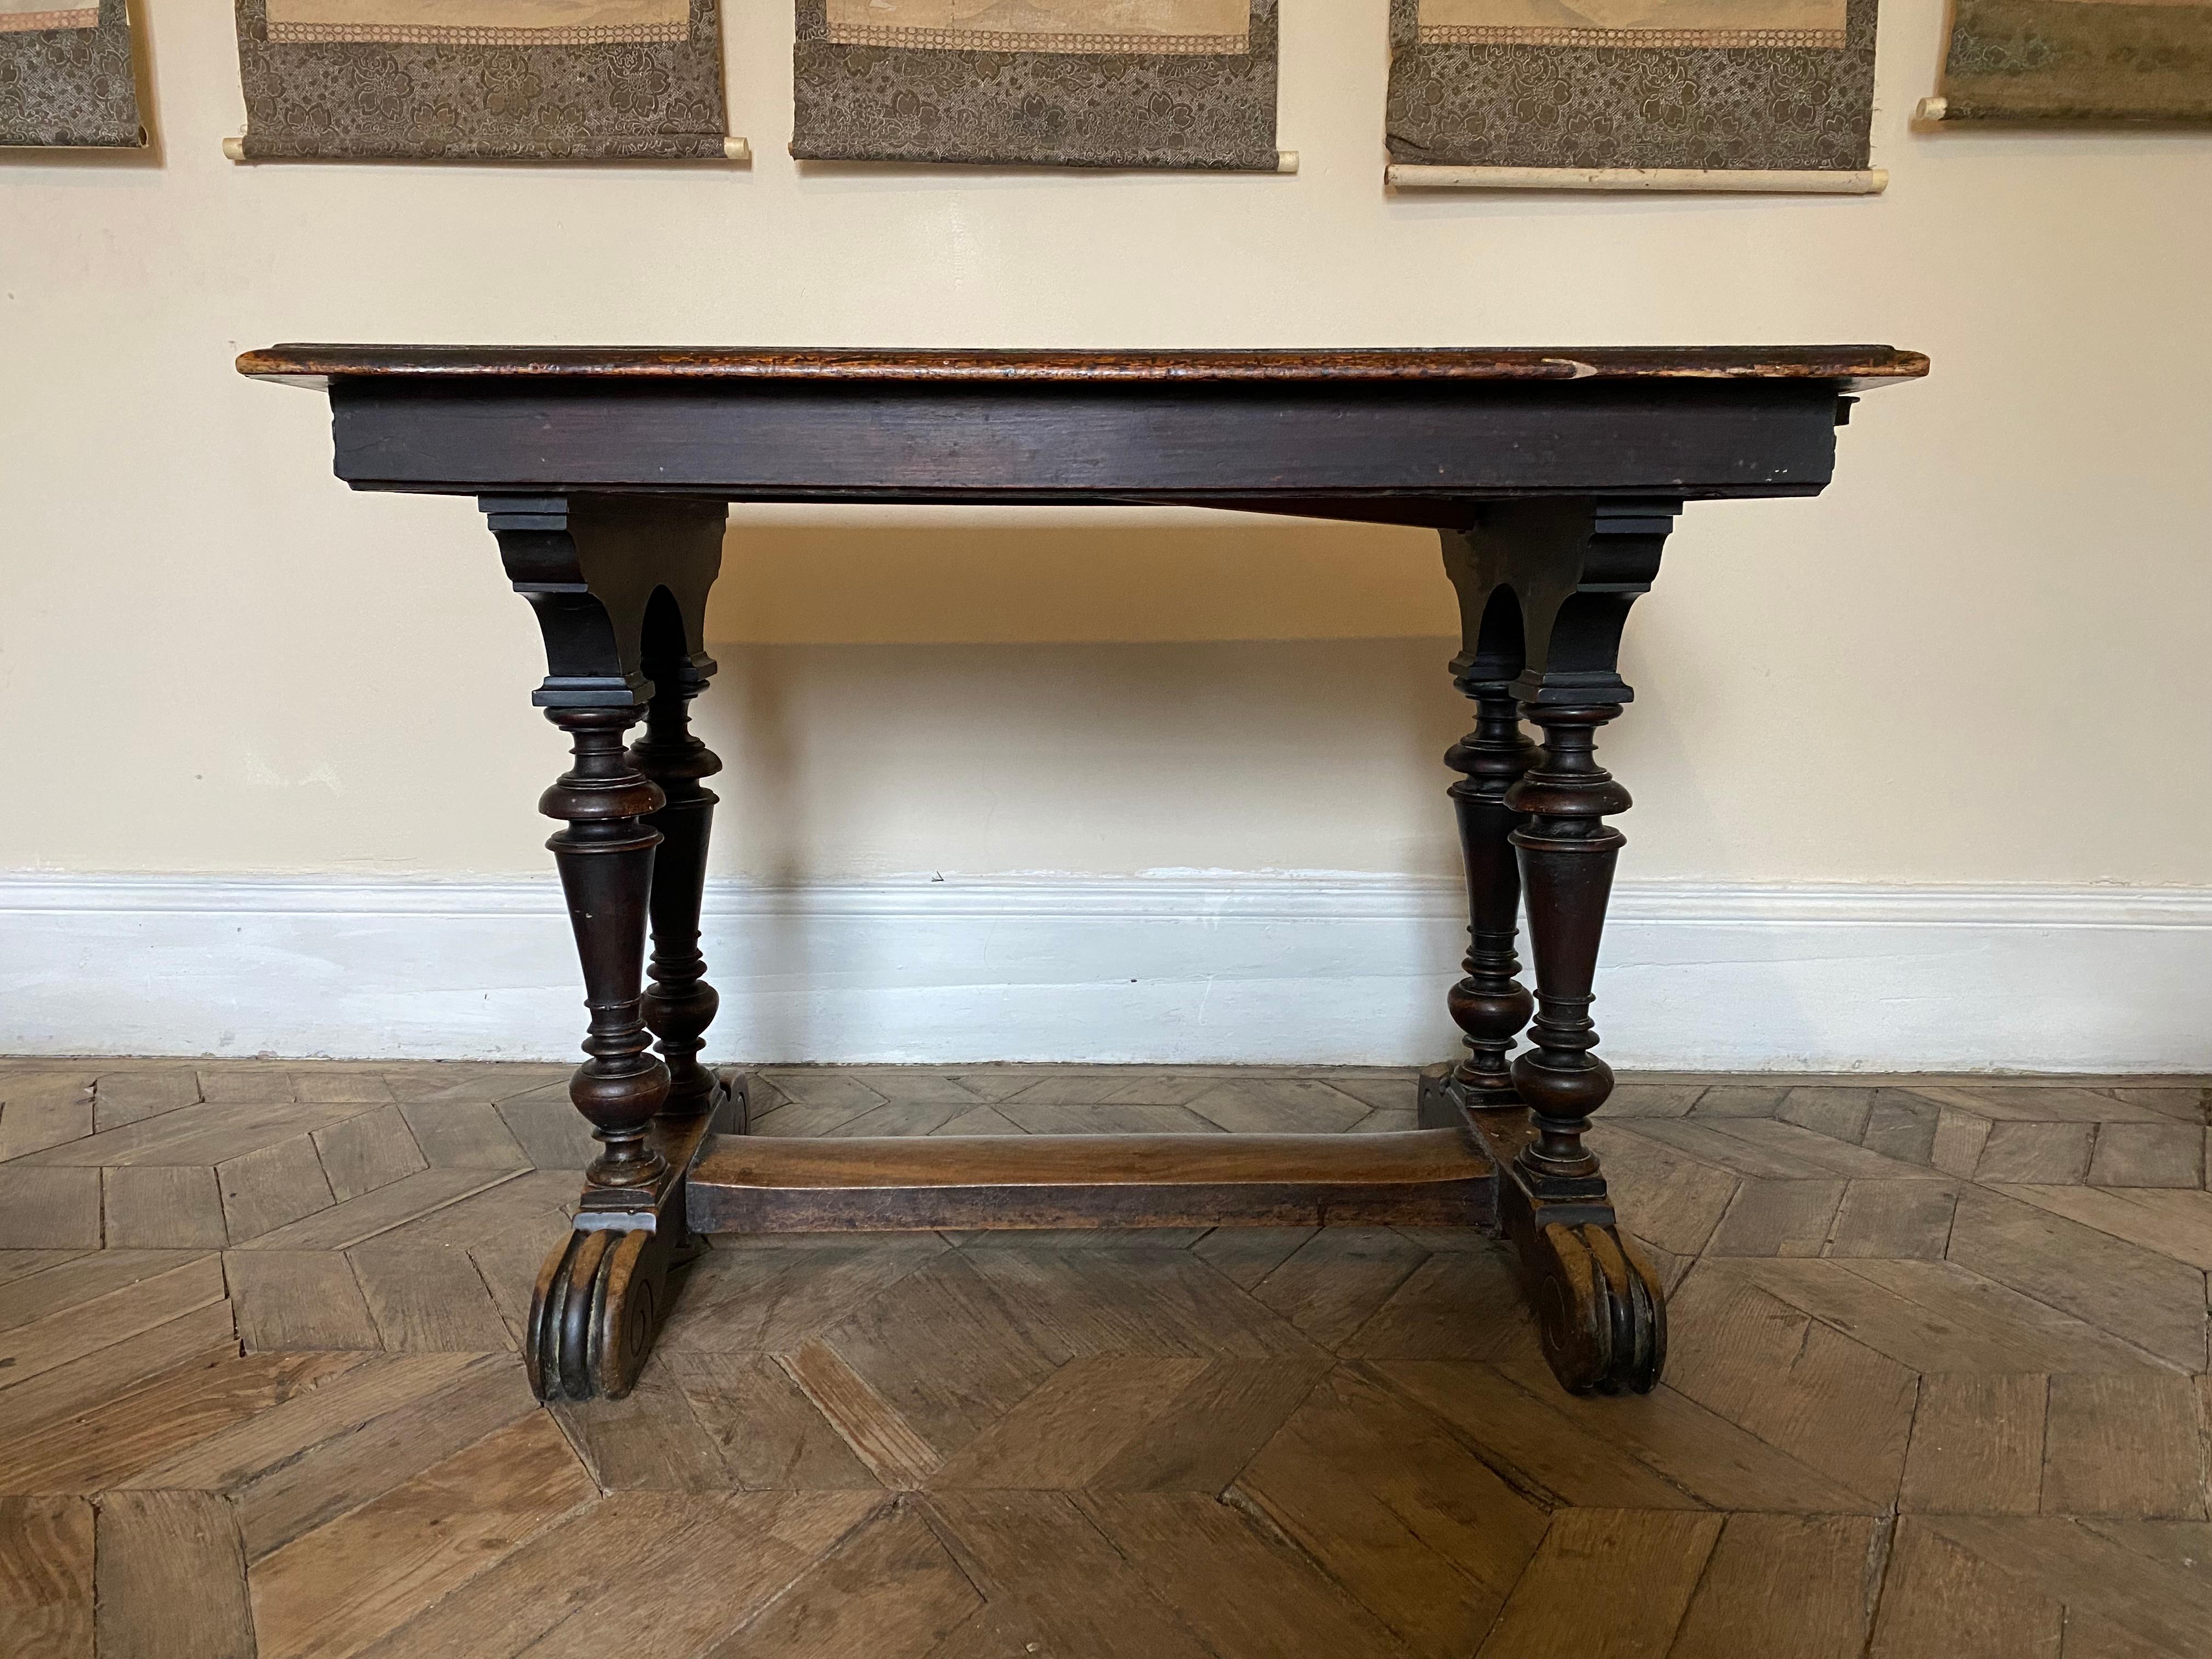 Rare and nice pair of estaminet table from the end of the 18th century. Beautiful dark patina, the legs are carved in baluster and joined by a H-shaped strut. 
This type of table was present in estaminet, places located in the north of France and